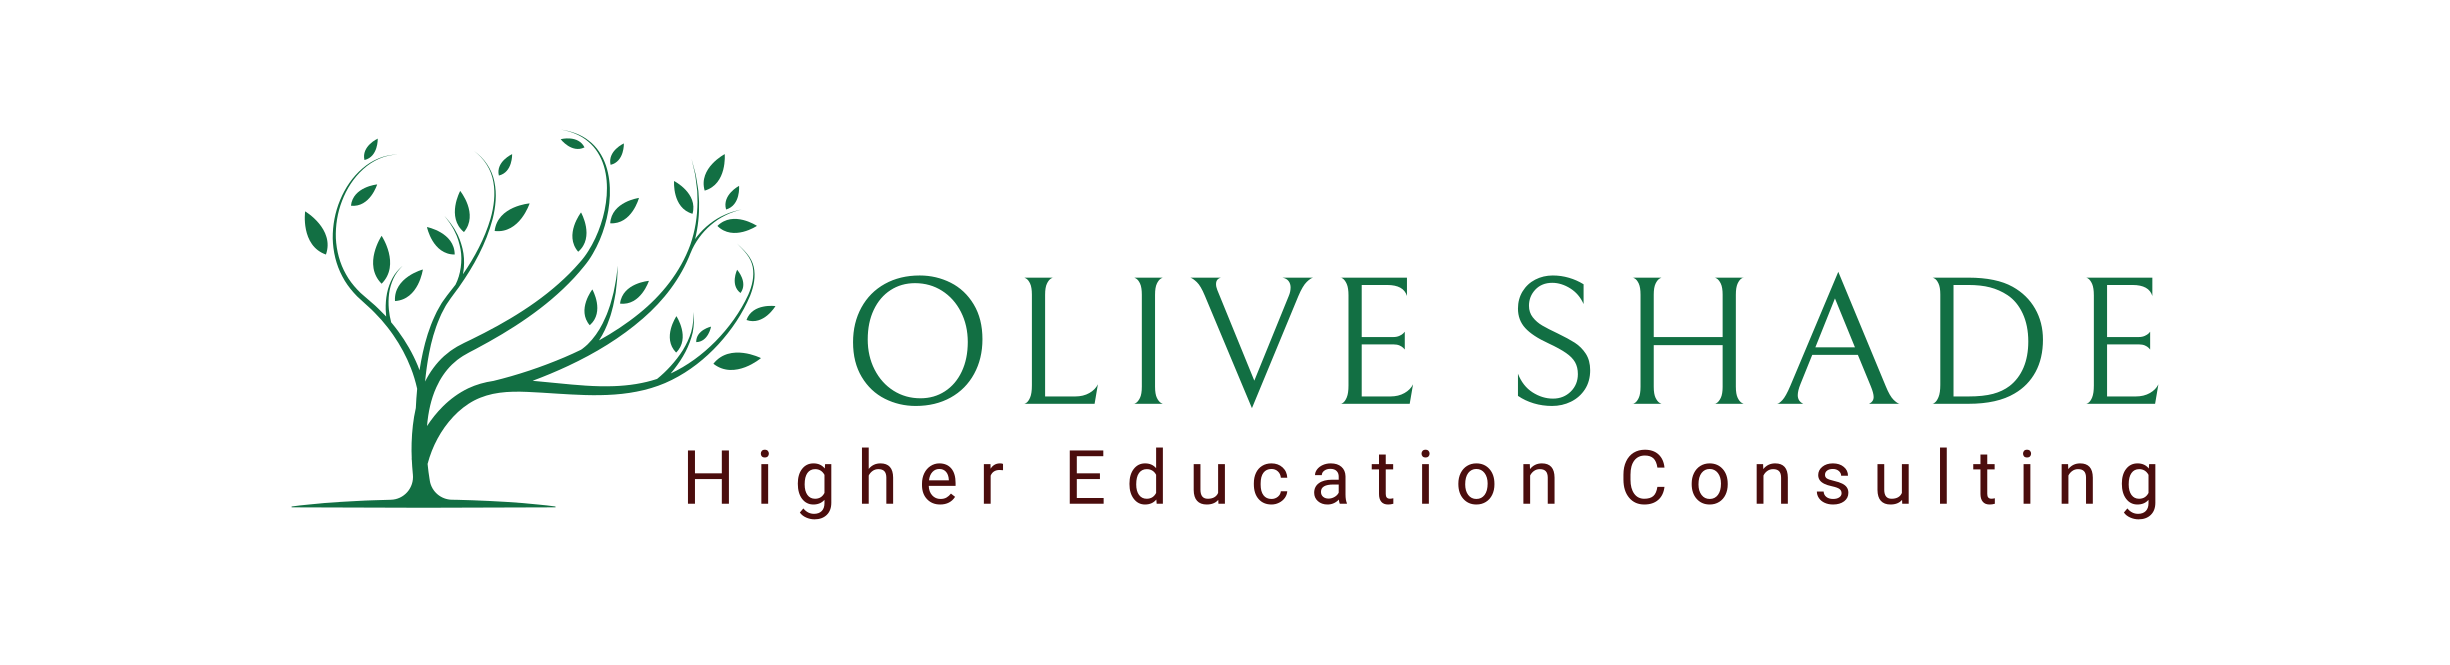 Olive Shade  Higher Education Consulting, LLC